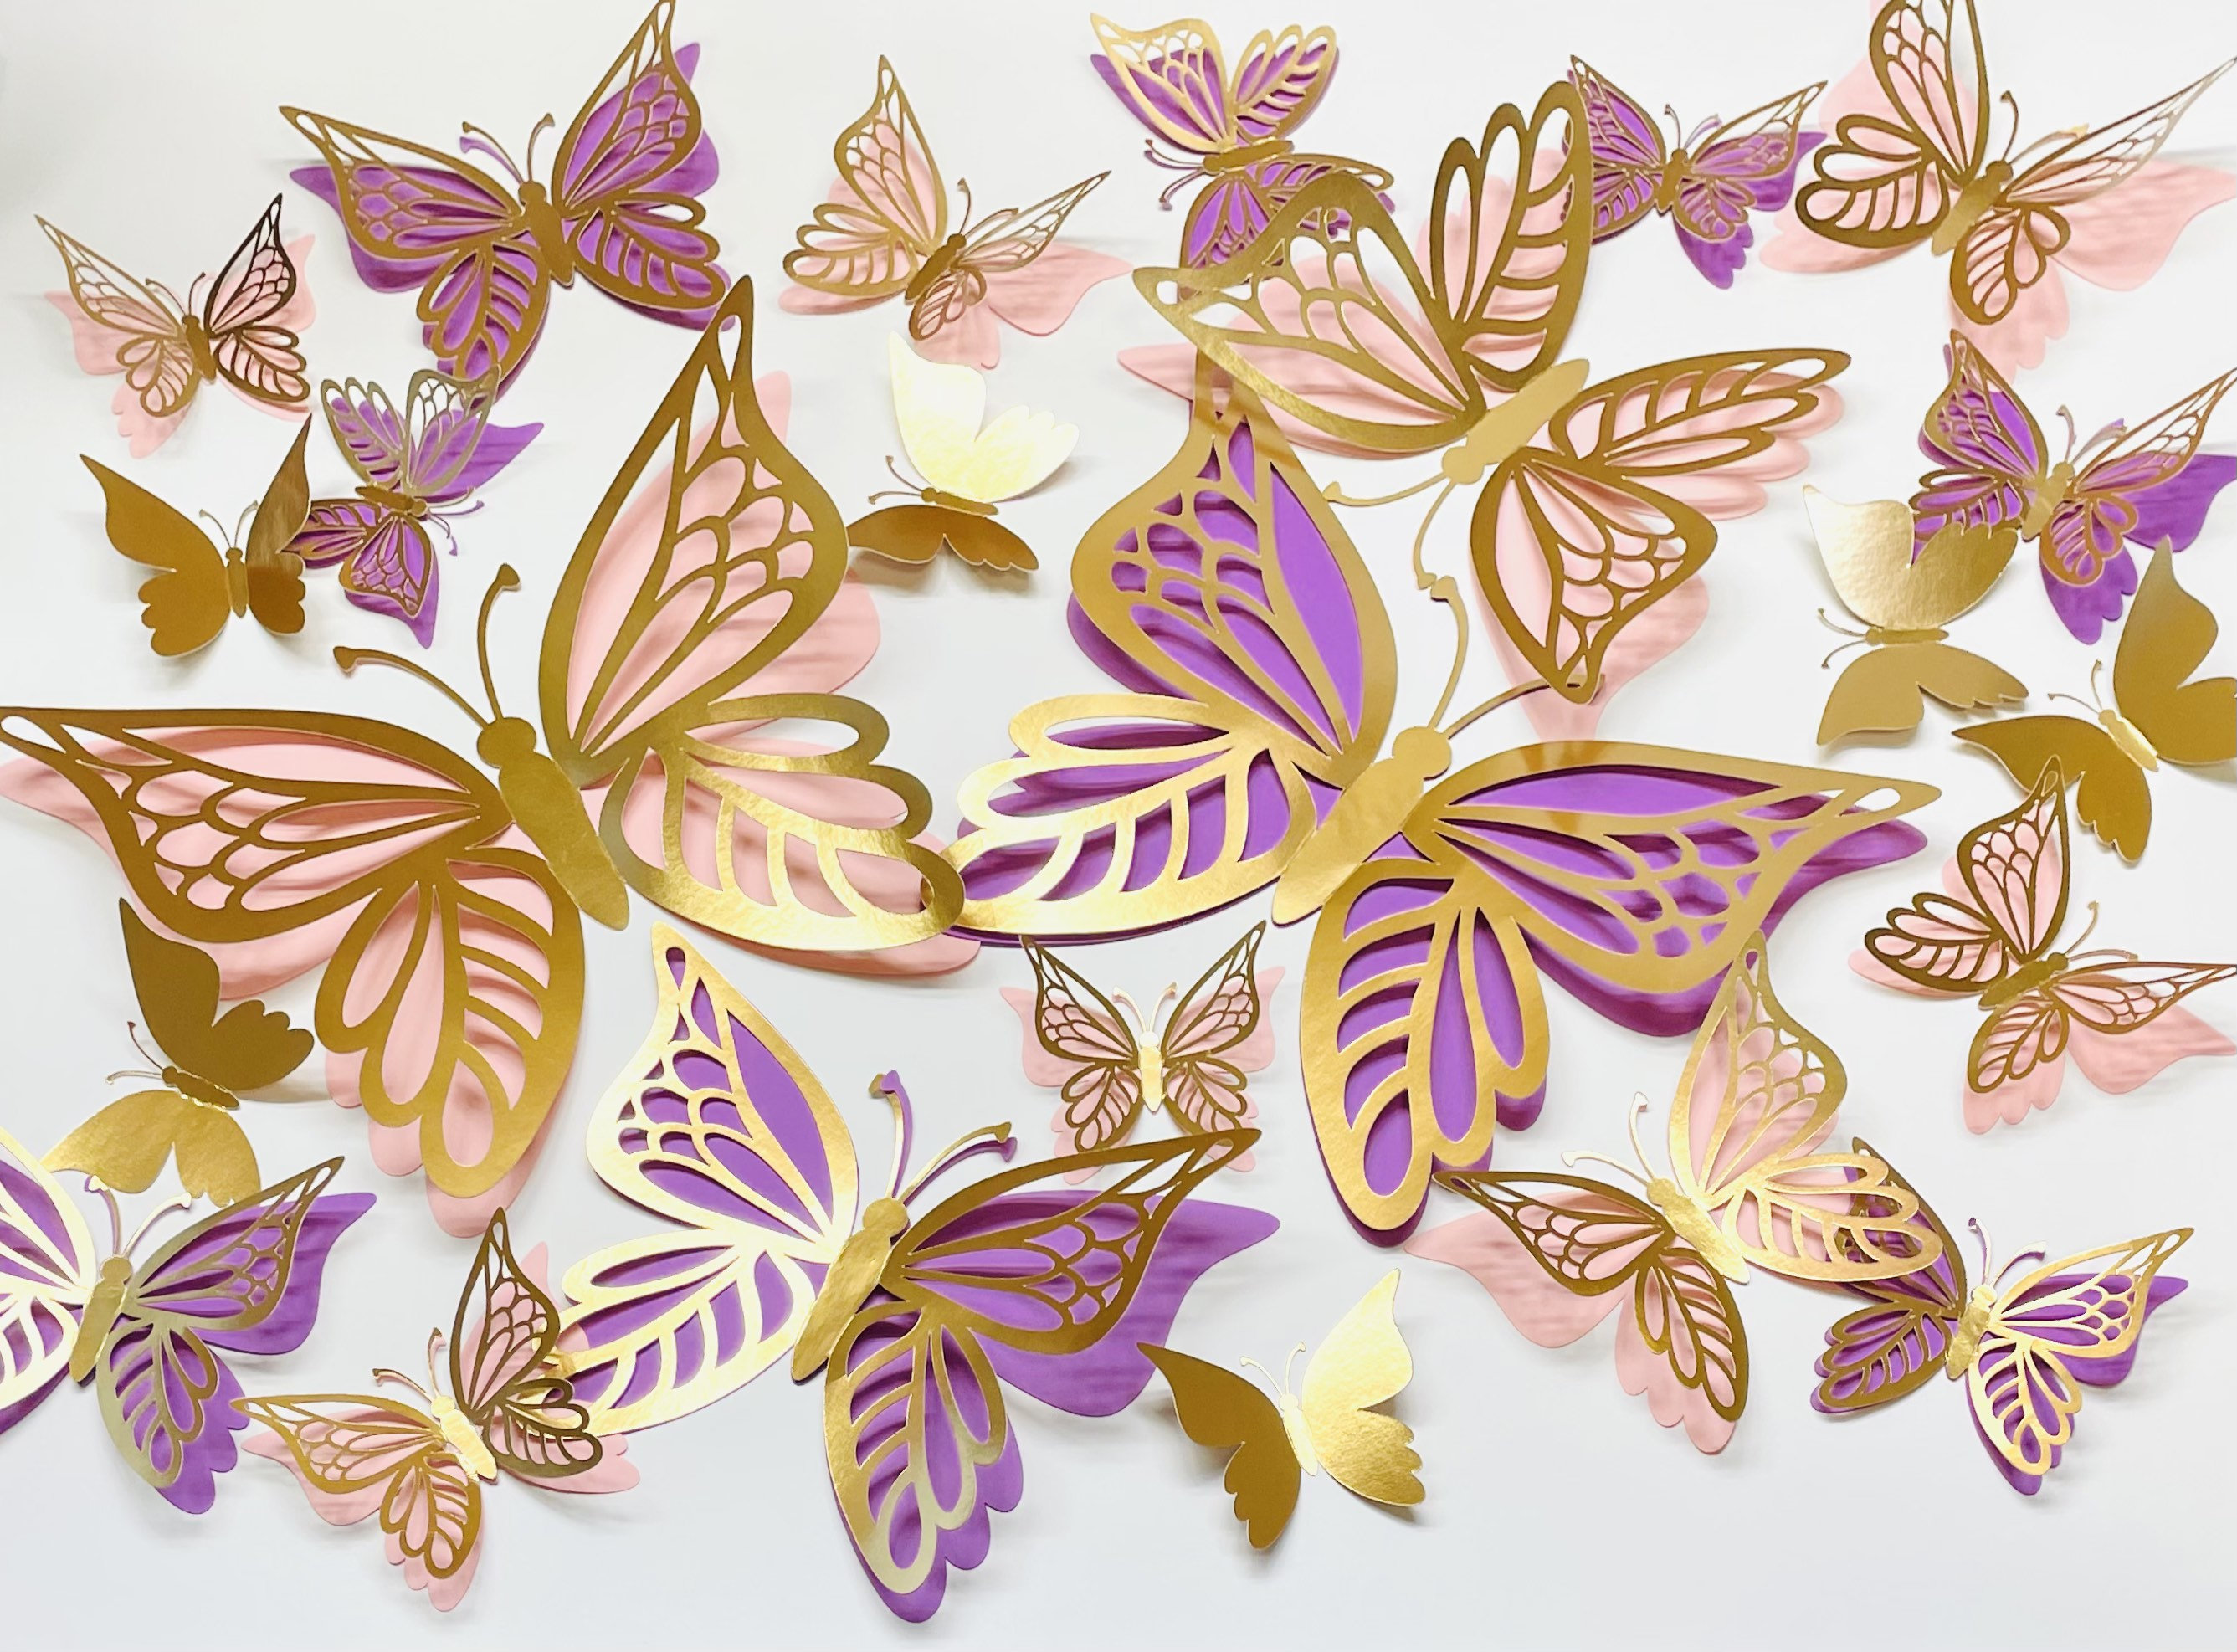 Custom Flat Wrapping Paper for Wedding, Birthday, Mothers Day, Congrats-  Elegant Lily Floral with Butterfly in Pink